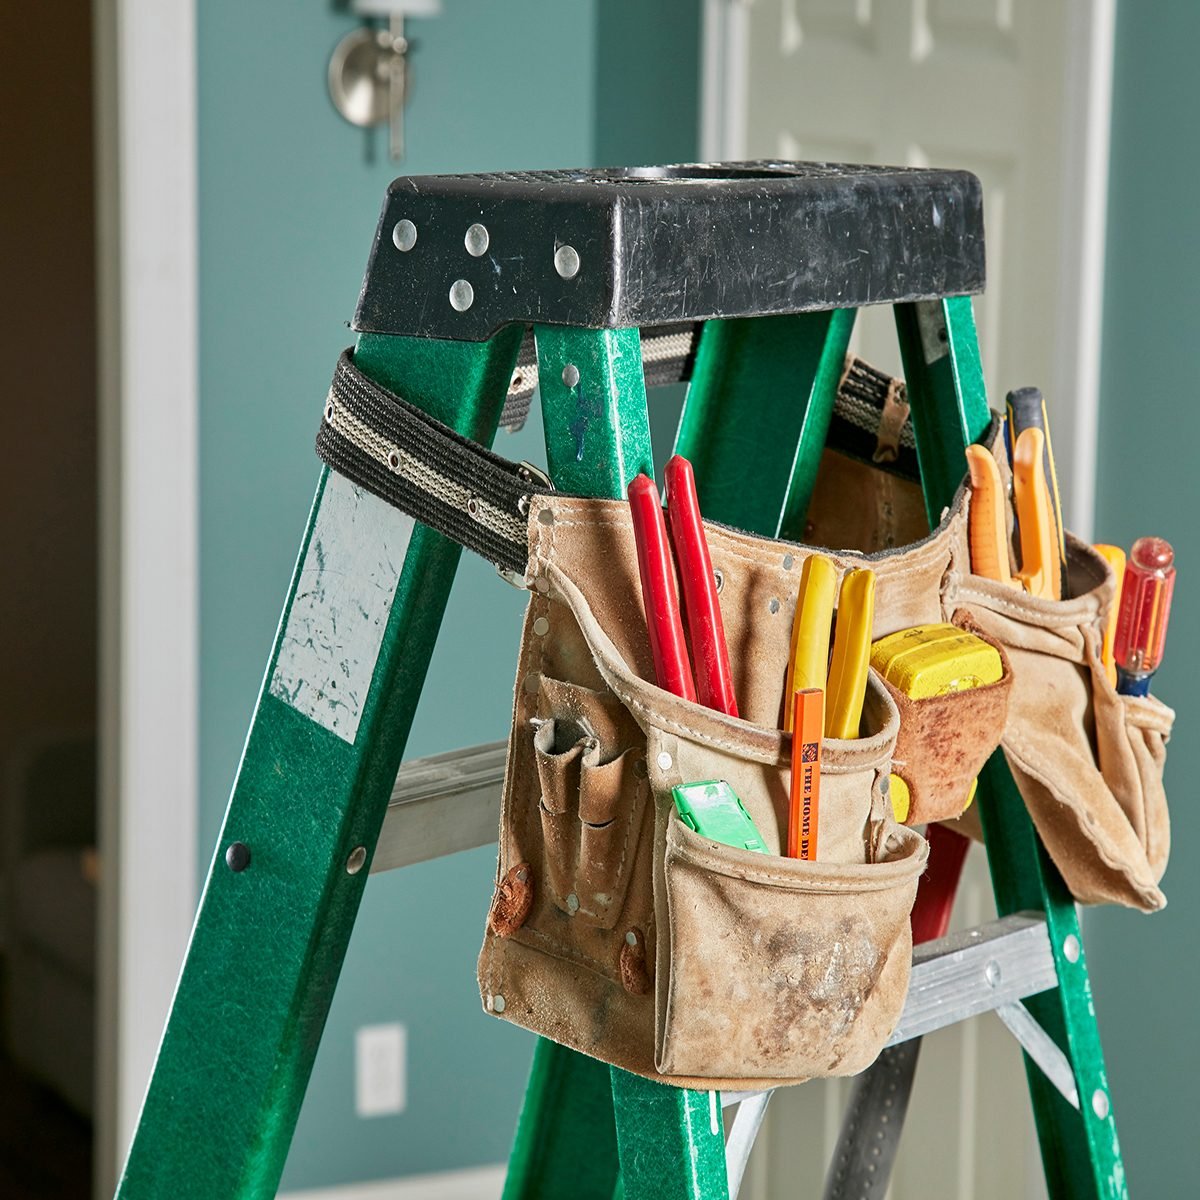 Tool bag draped over a ladder for easy access | Construction Pro Tips